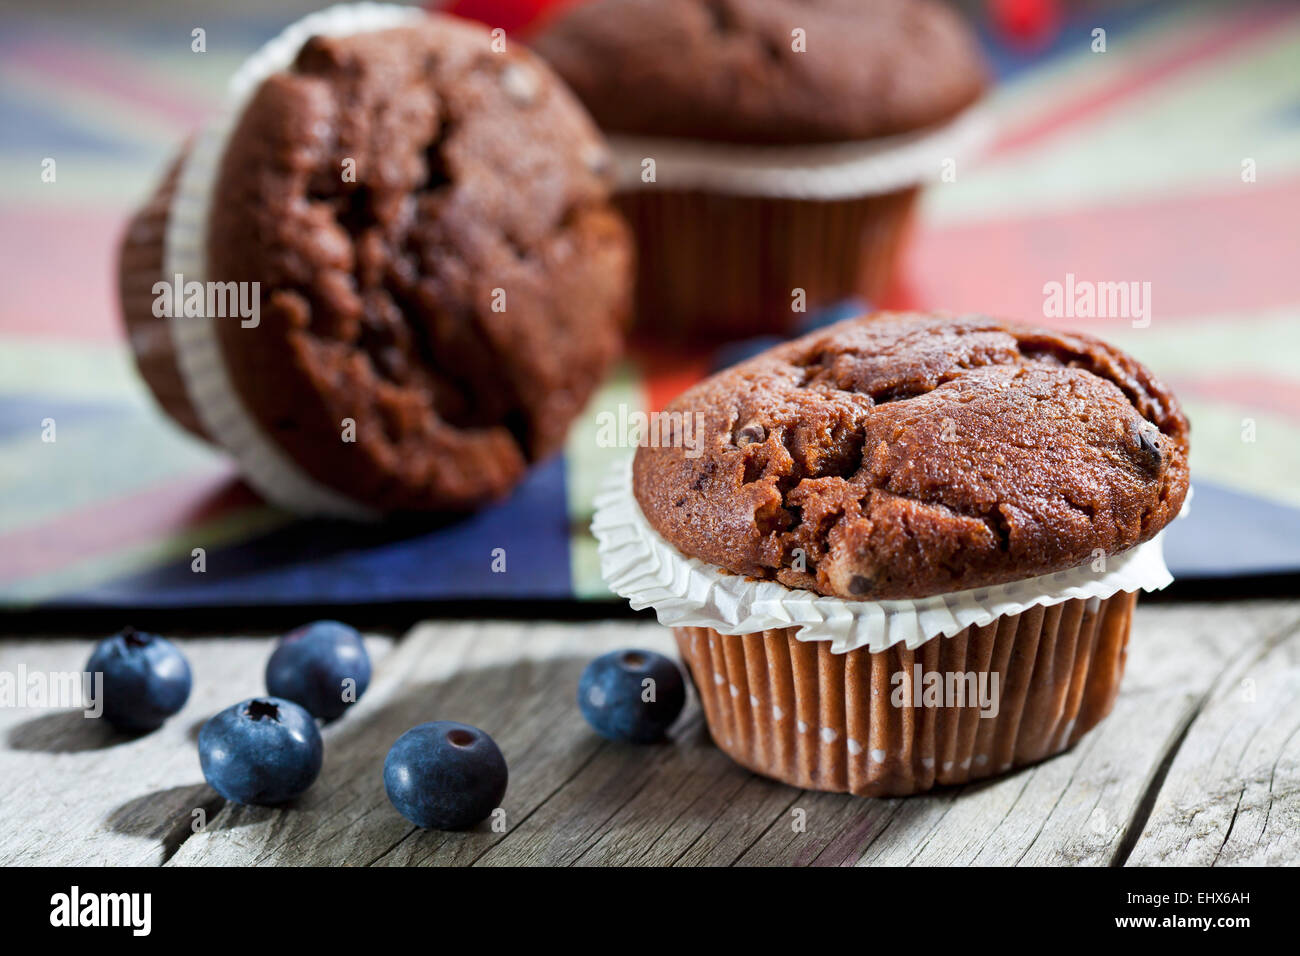 Chocolate muffins and blueberries on wood, English flag Stock Photo